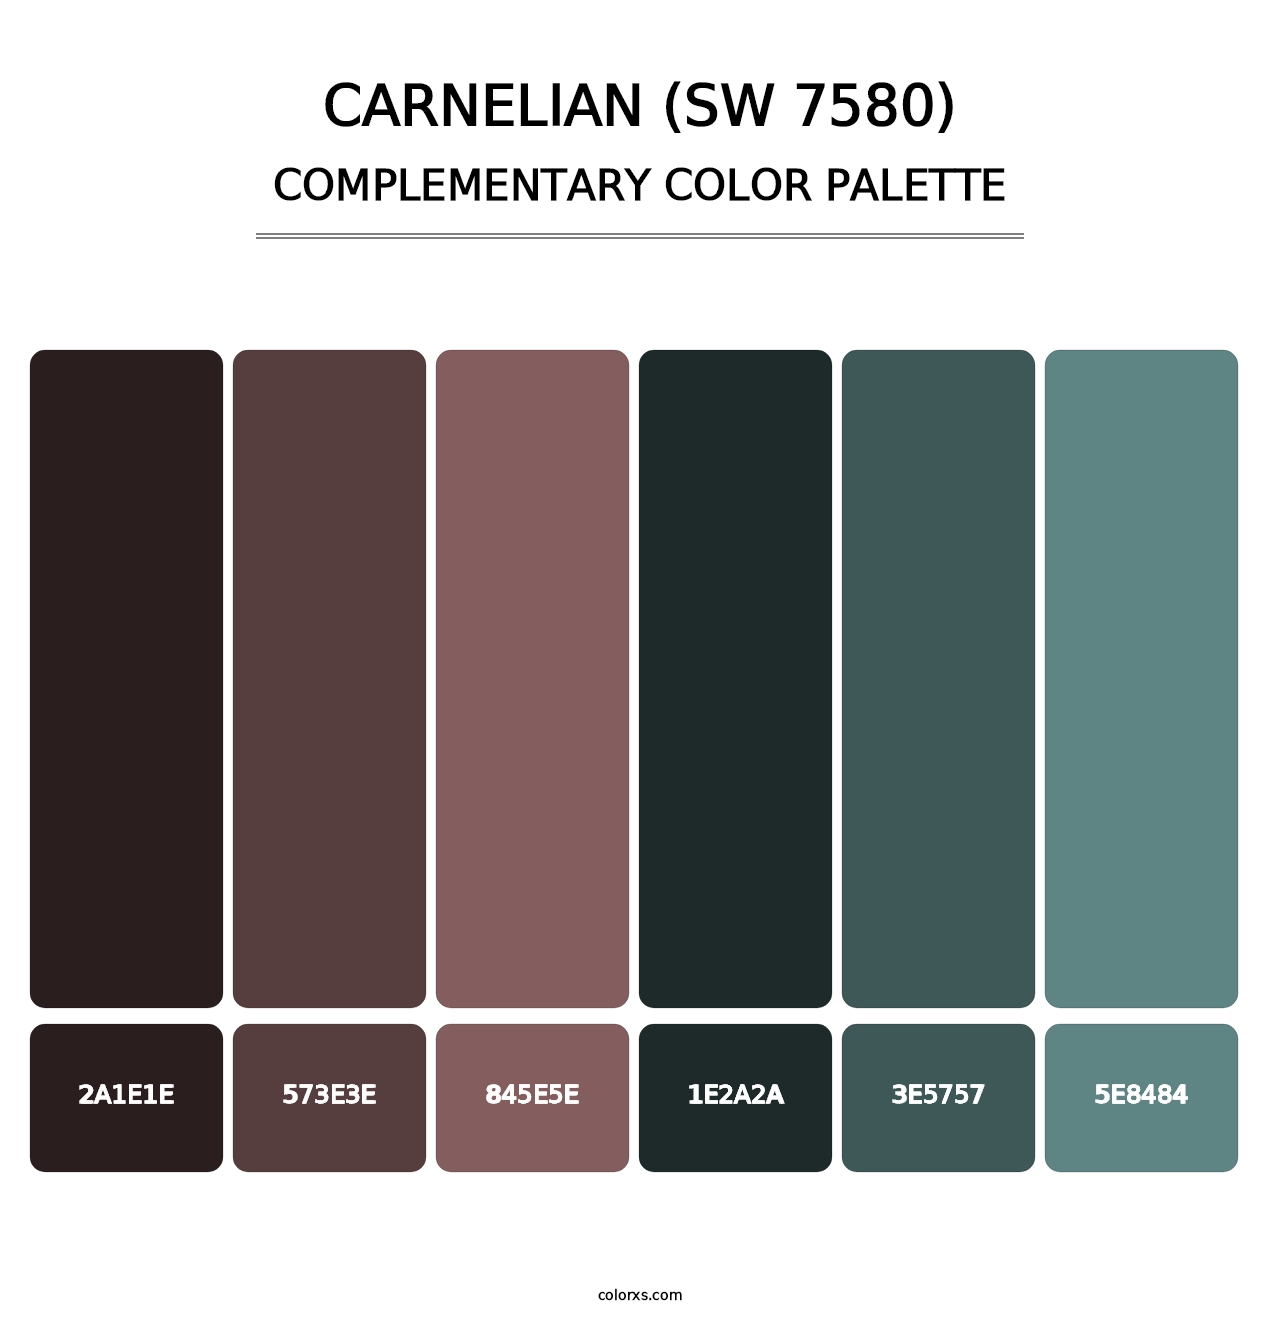 Carnelian (SW 7580) - Complementary Color Palette